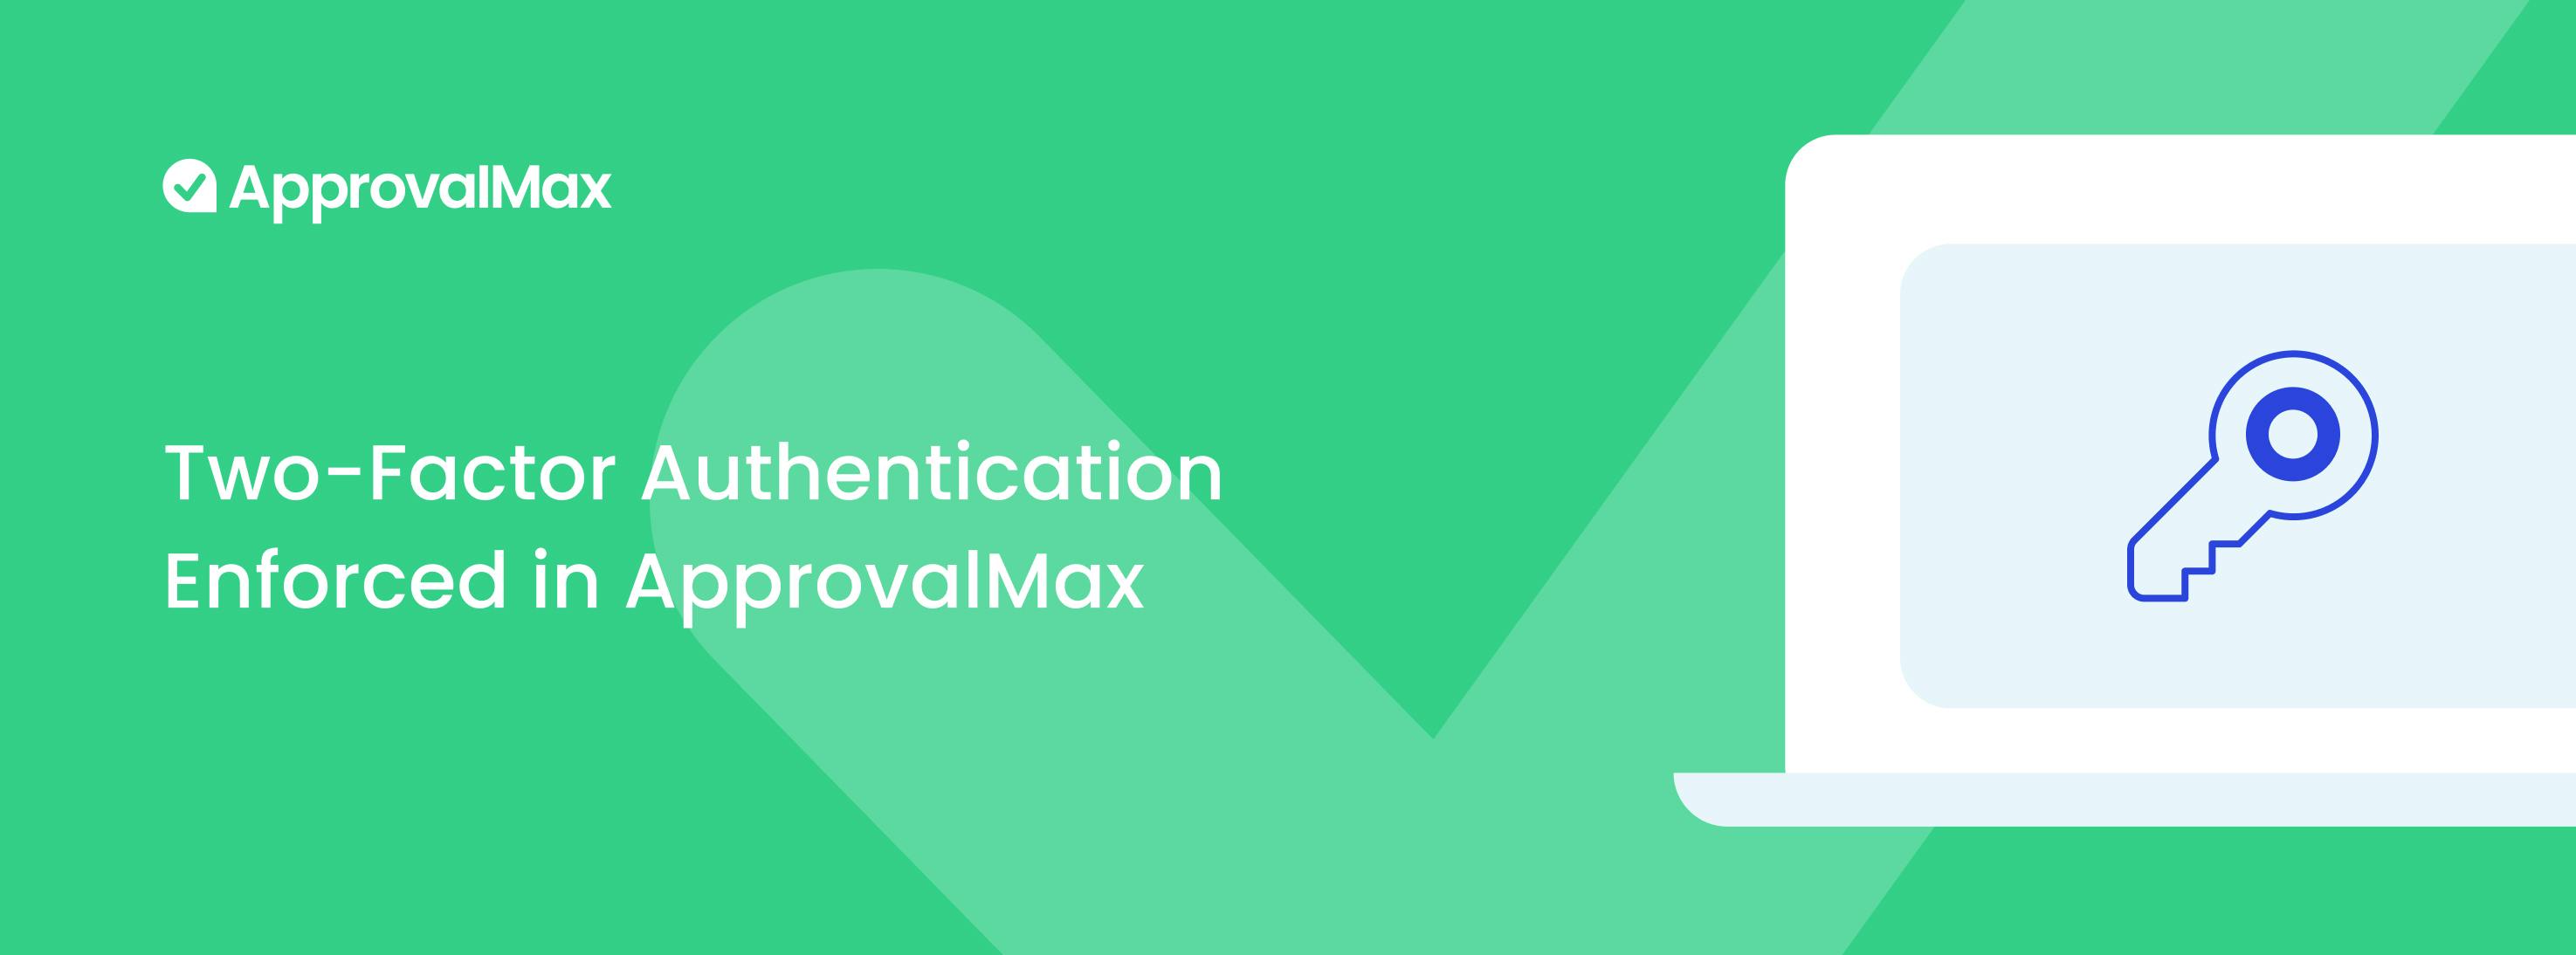 Two-Factor Authentication Enforced in ApprovalMax logo